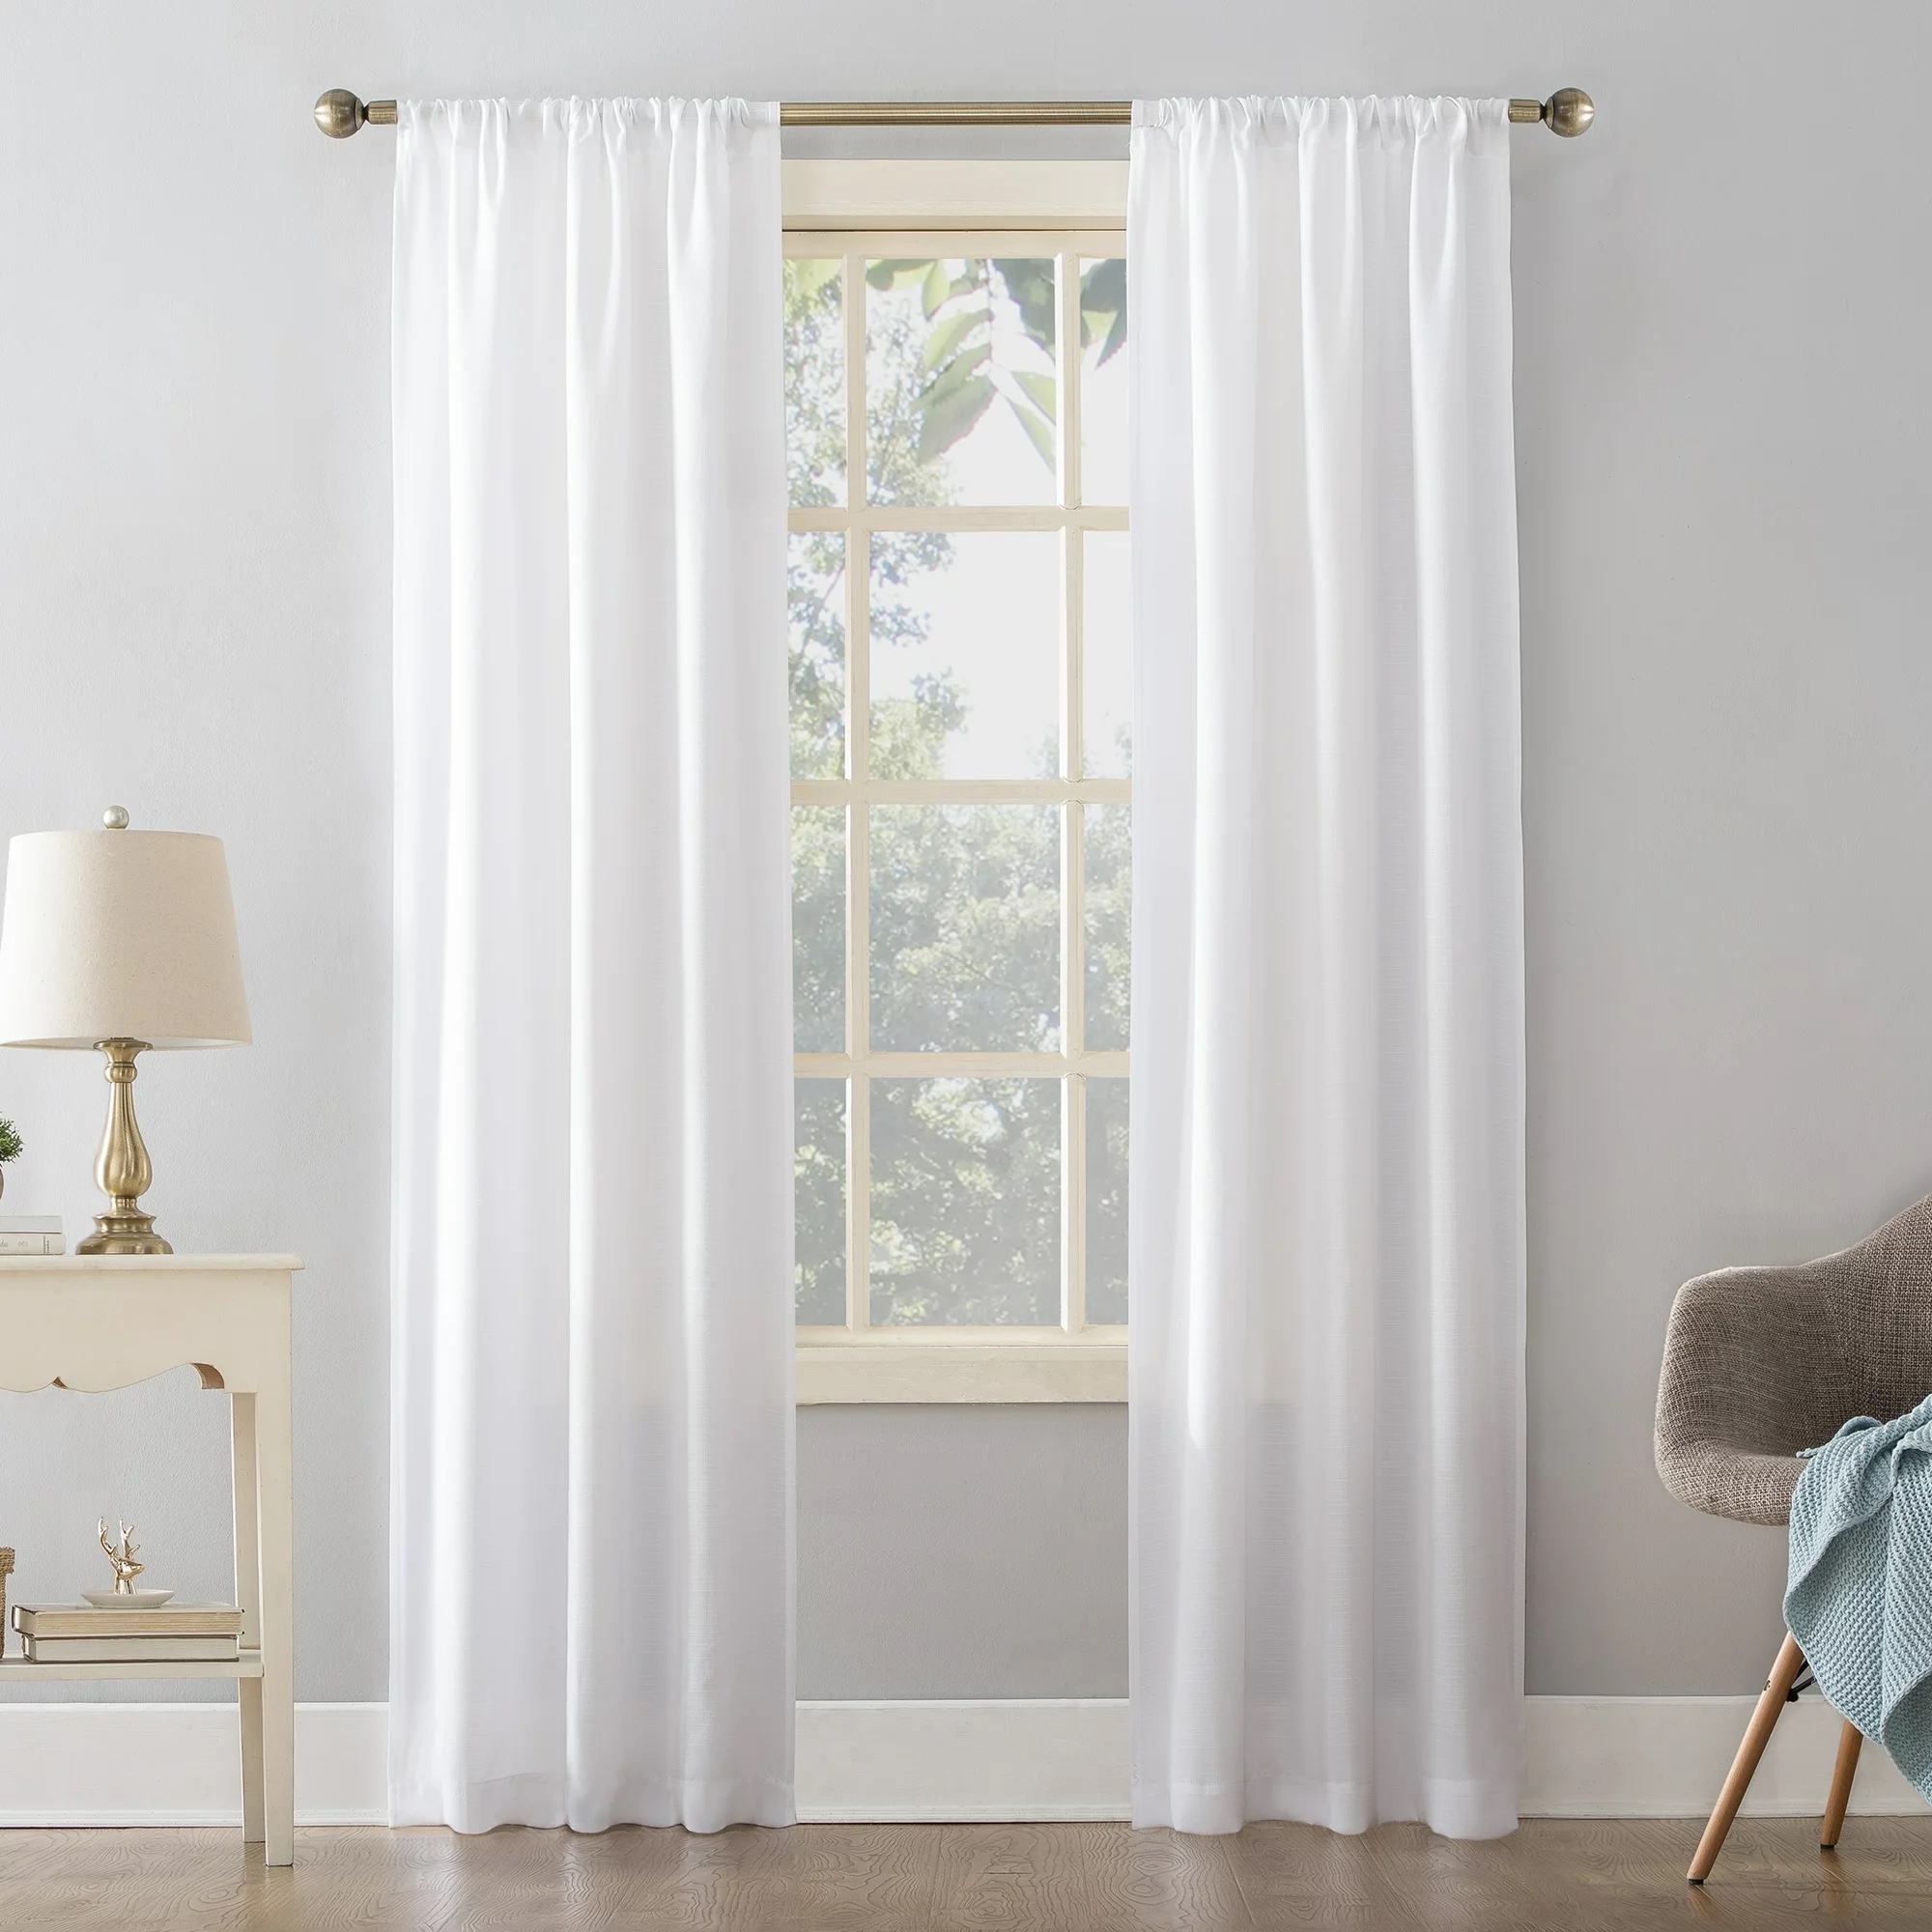 the set of textured window curtains